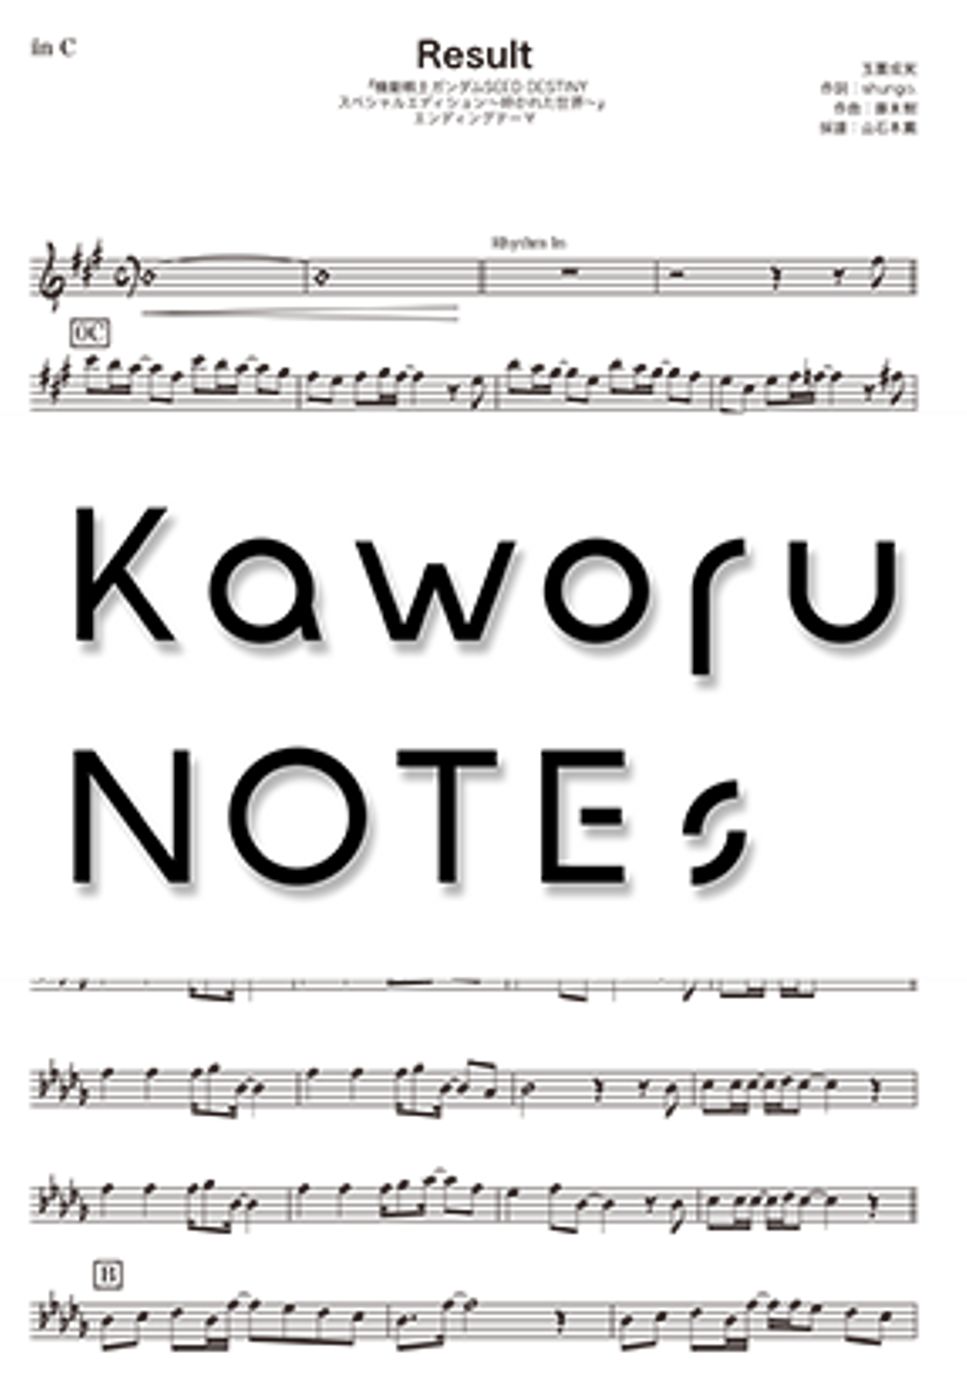 Nami Tamaki - Result（in F/Mobile Suit GUNDAM SEED DESTINY） by Kaworu NOTEs